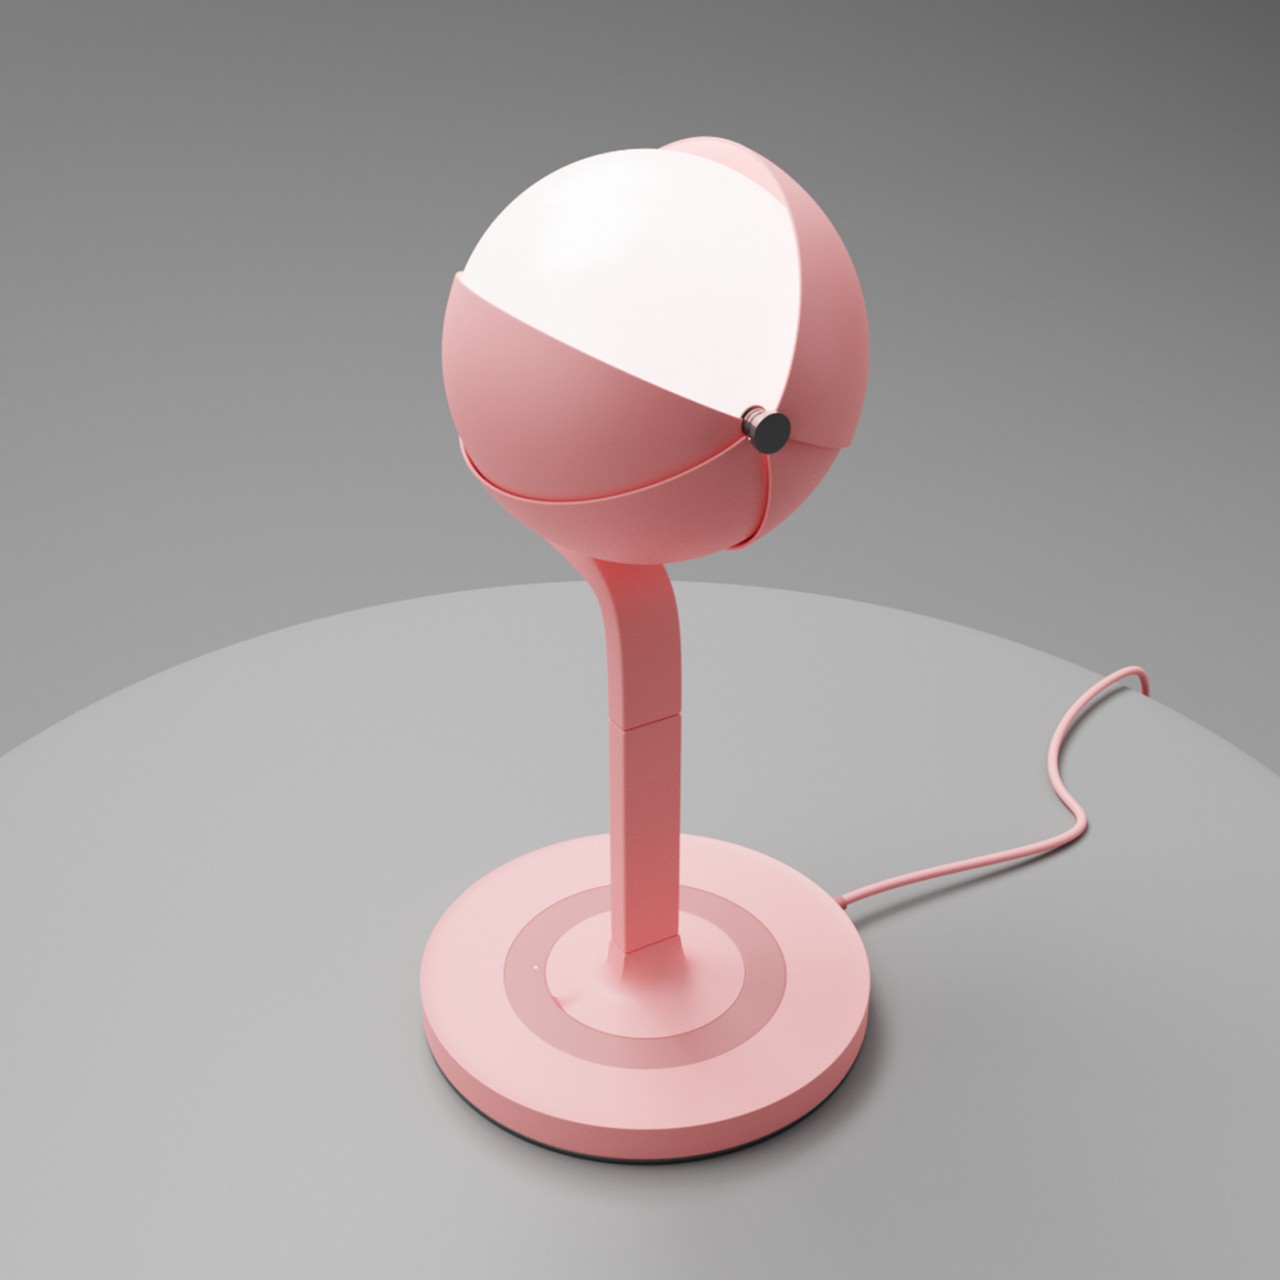 This eerie table lamp looks like an eyeball but can easily adapt to your lighting needs